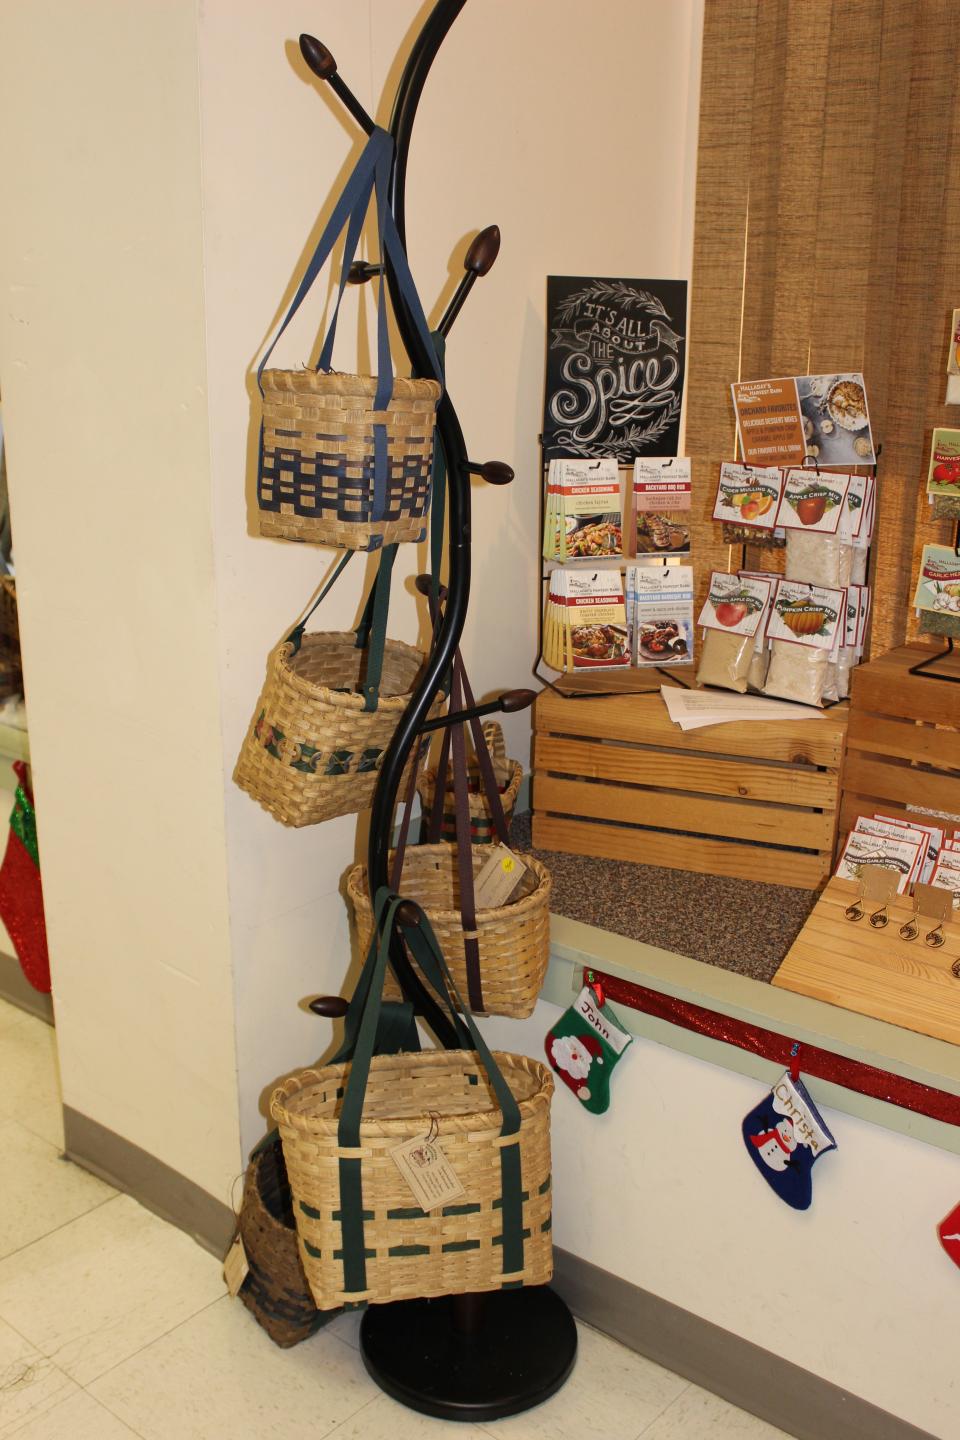 A display of handcrafted baskets hanging on a display rack